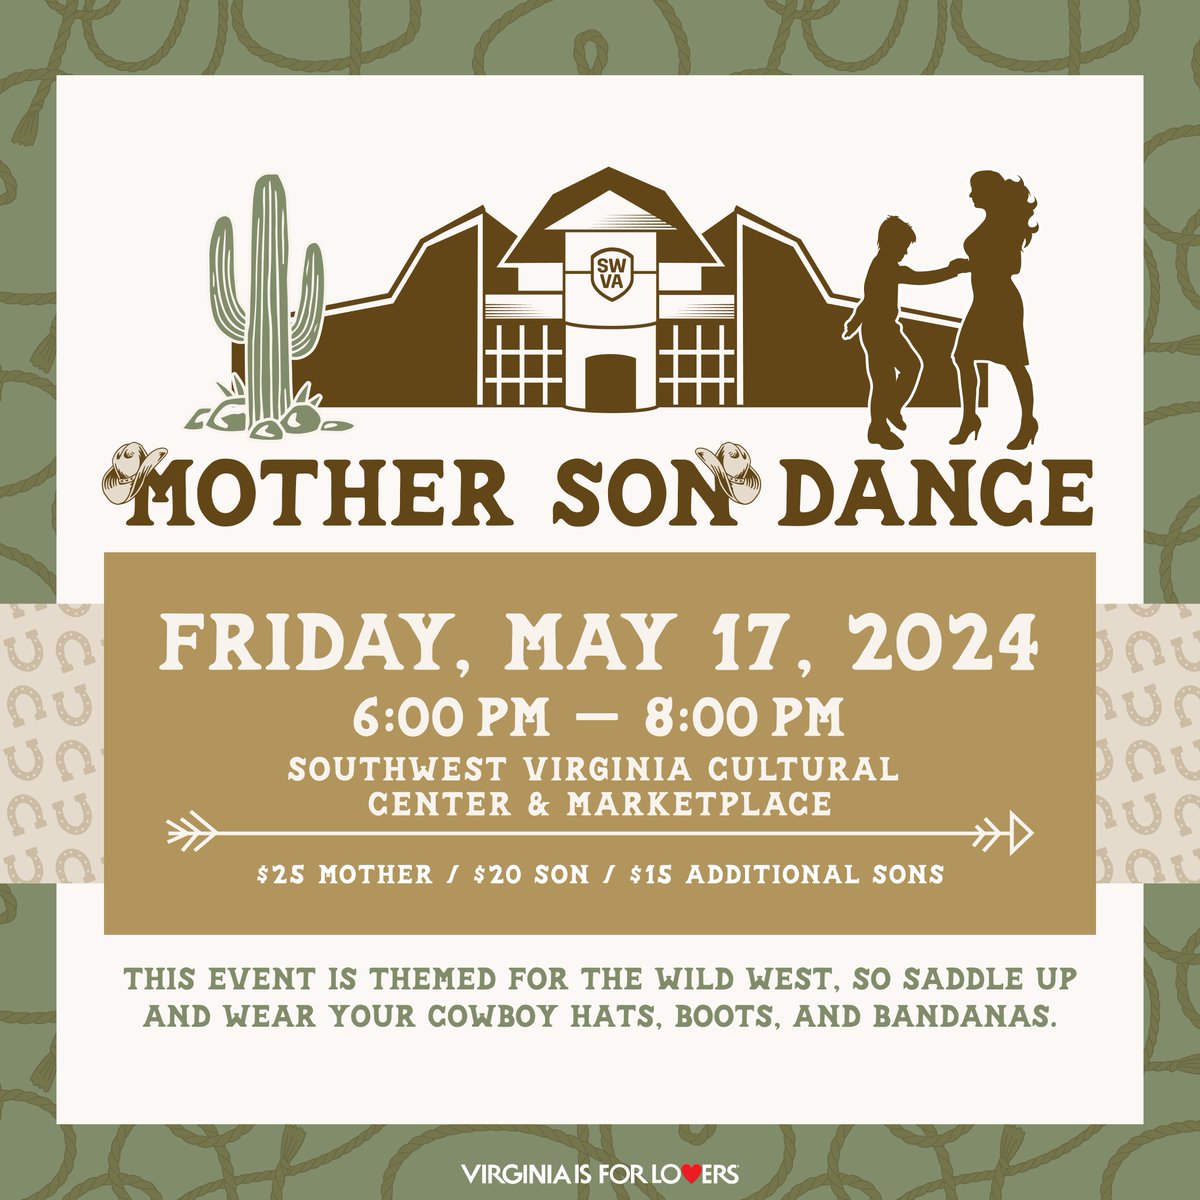 🤠 Calling all cowpokes! Tickets for the Mother Son dance at the SWVA Cultural Center & Marketplace are ON SALE NOW! 

🐎 'Giddy up and get yours TODAY! eventbrite.com/e/878225154077…